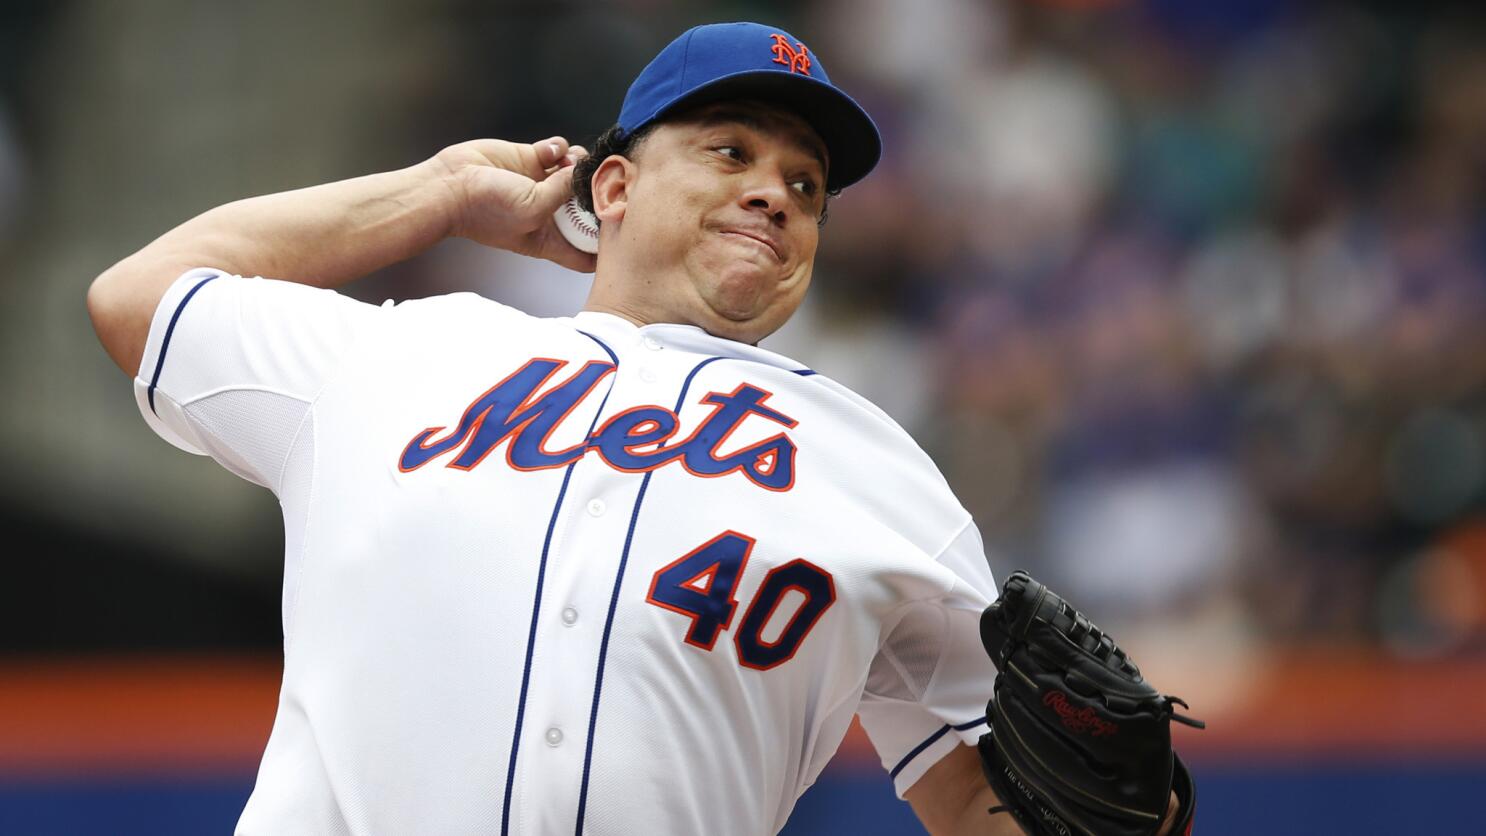 Veteran pitcher Bartolo Colon does not appear to be a fit for